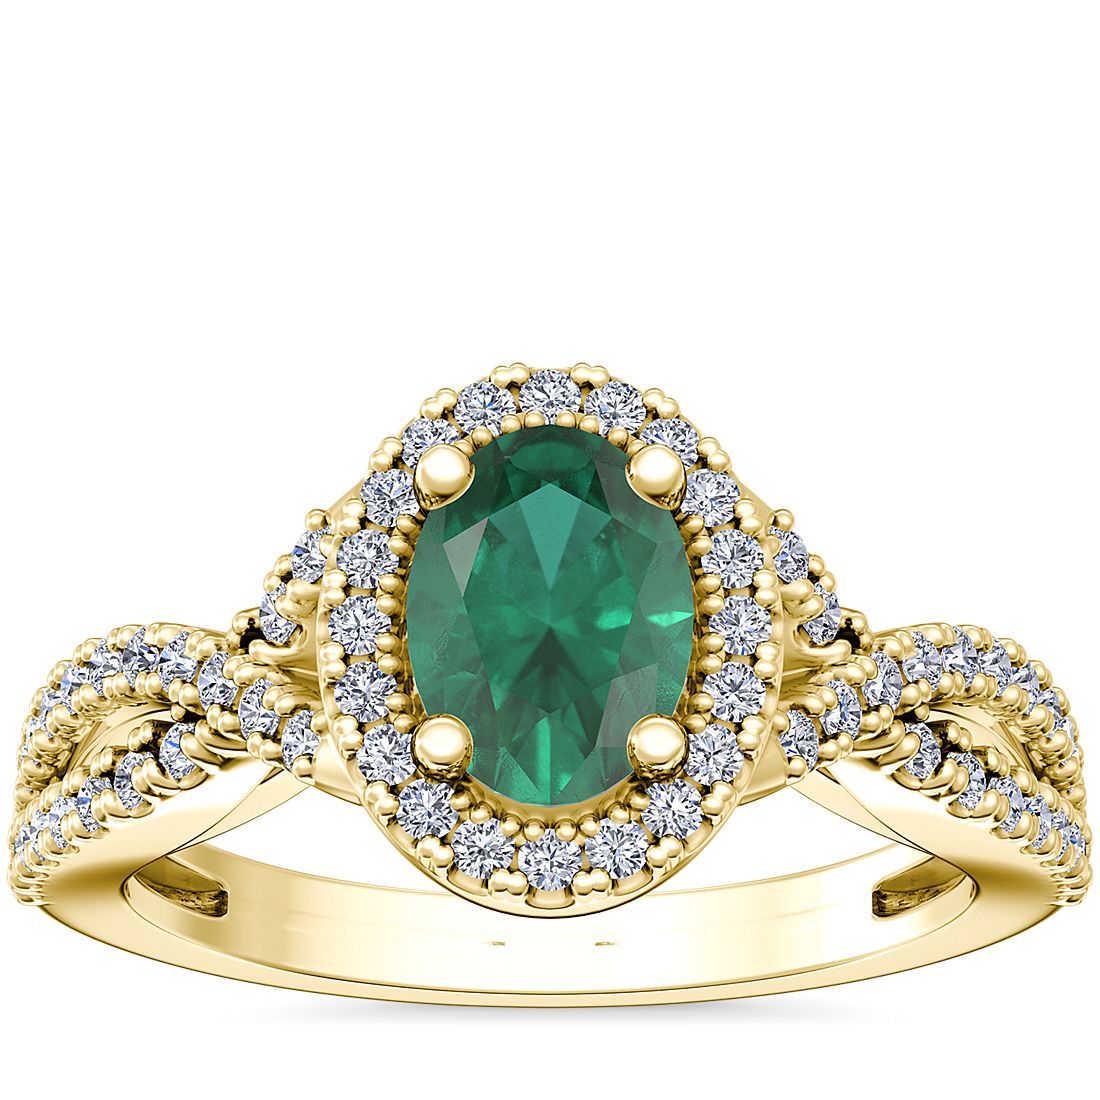 Twist Halo Diamond Engagement Ring with Oval Emerald in 14k Yellow Gold (7x5mm)